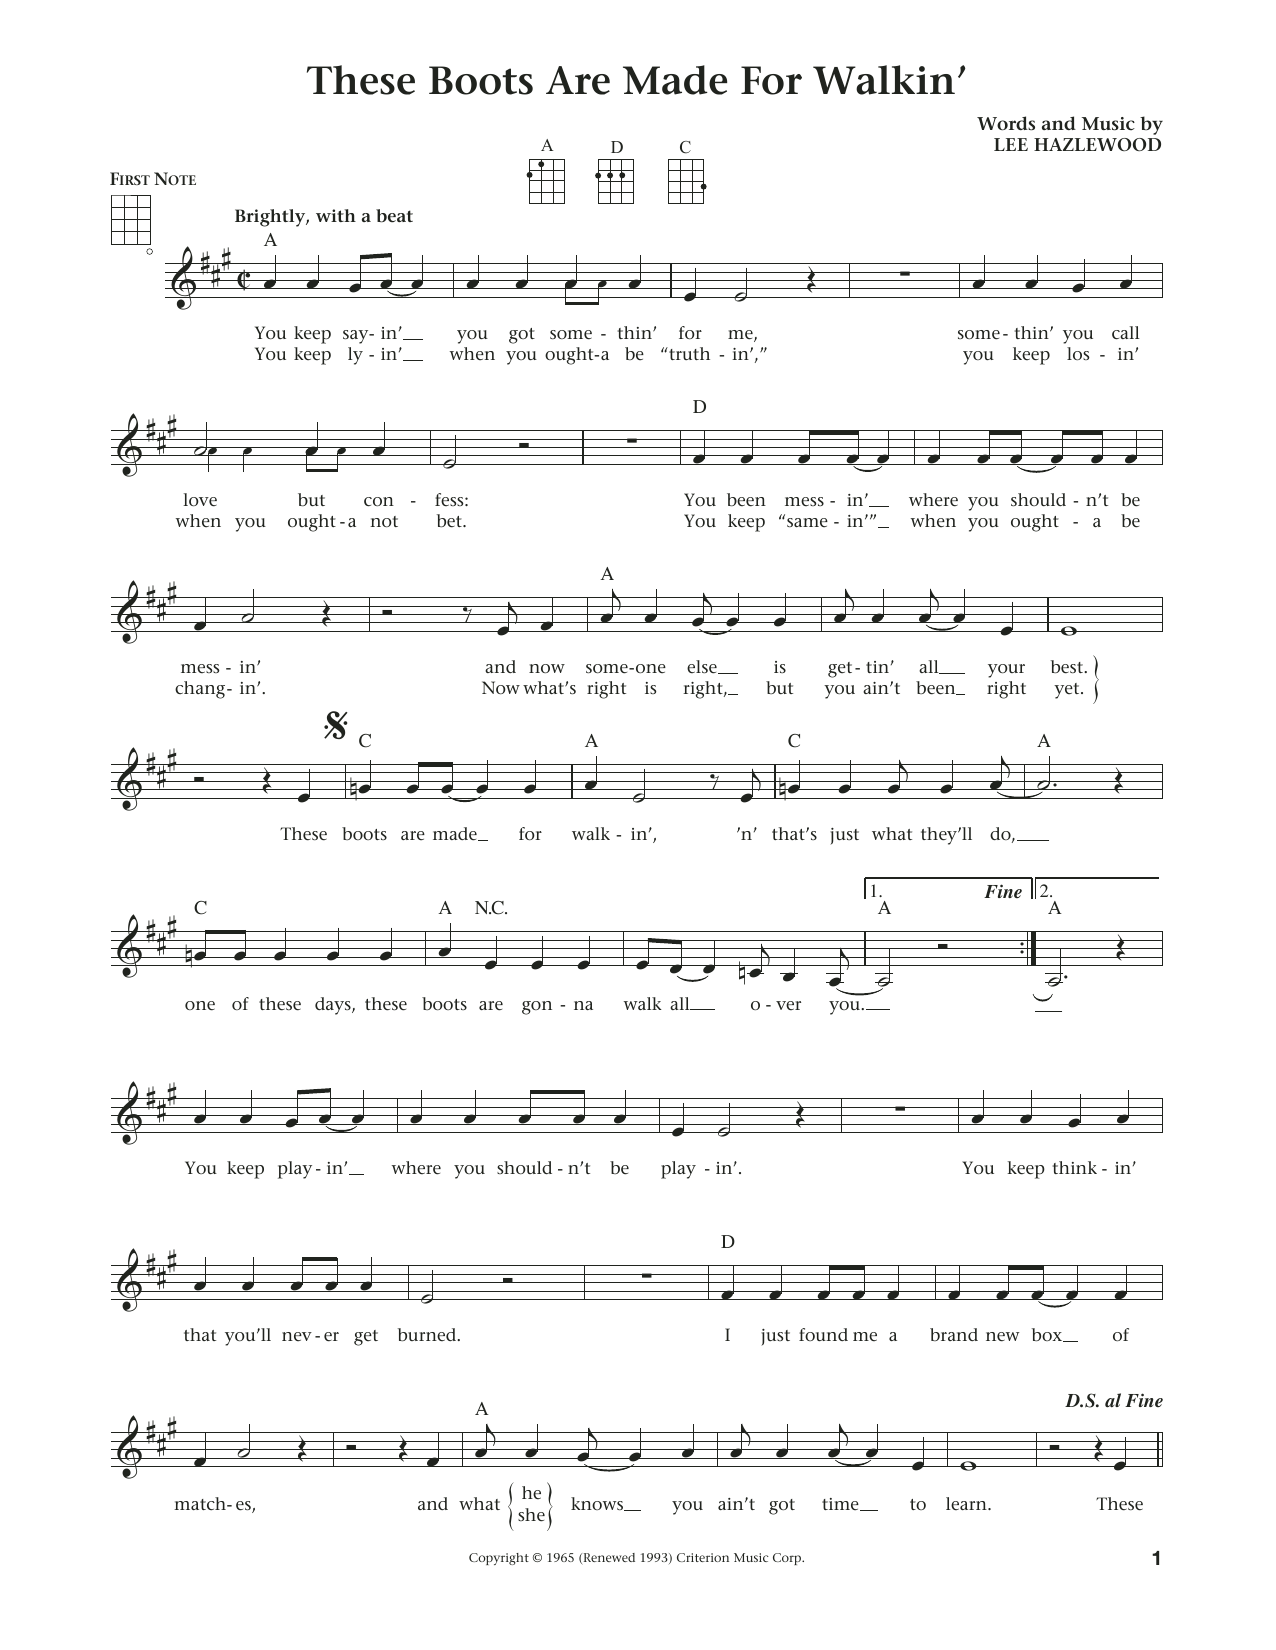 Download Nancy Sinatra These Boots Are Made For Walkin' (from Sheet Music